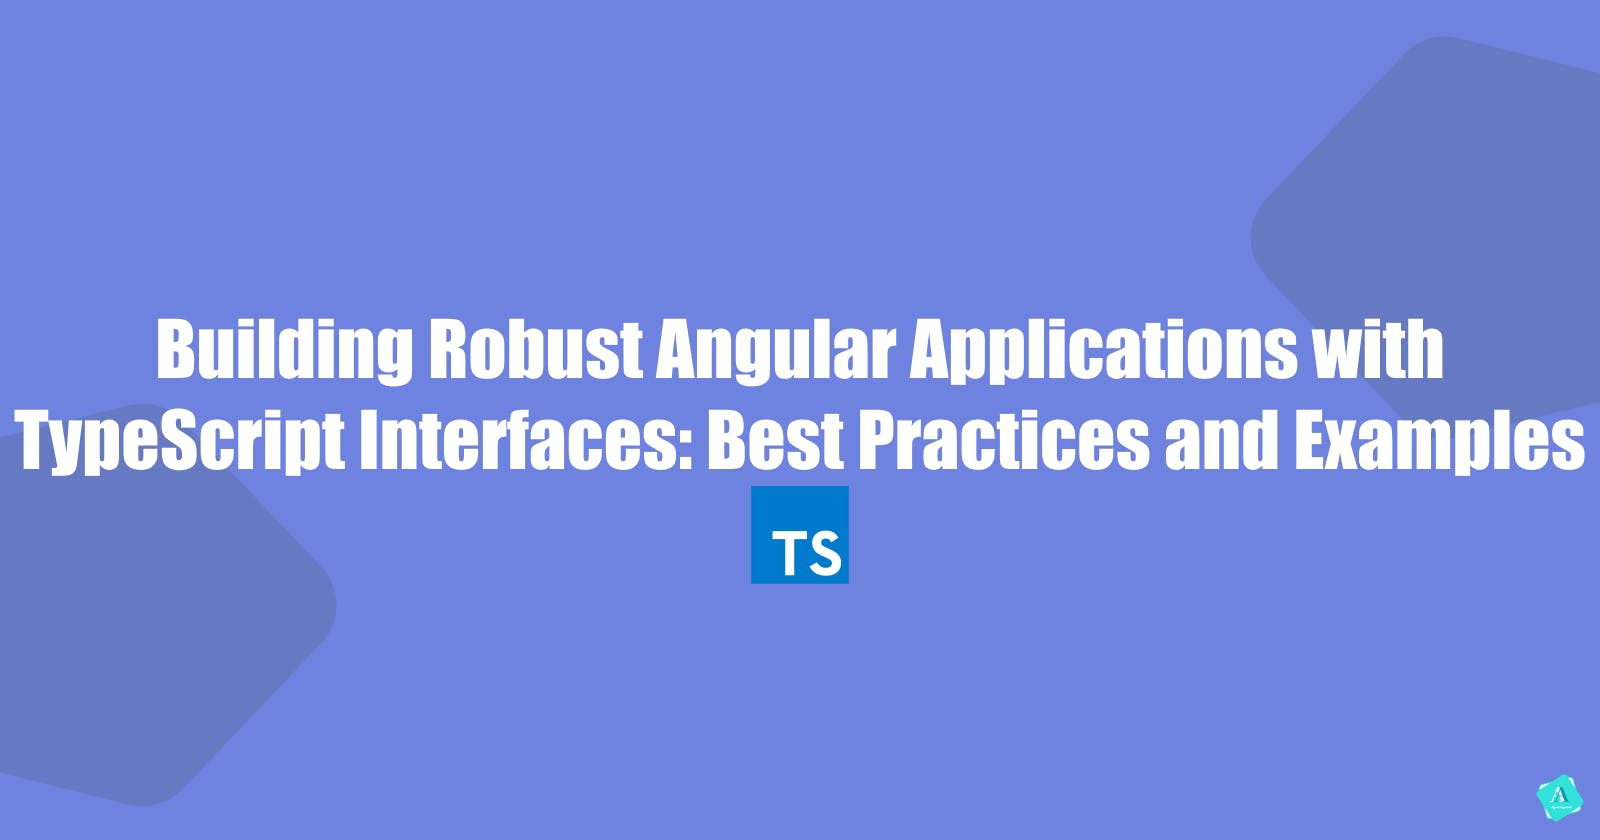 Building Robust Angular Applications with TypeScript Interfaces: Best Practices and Examples